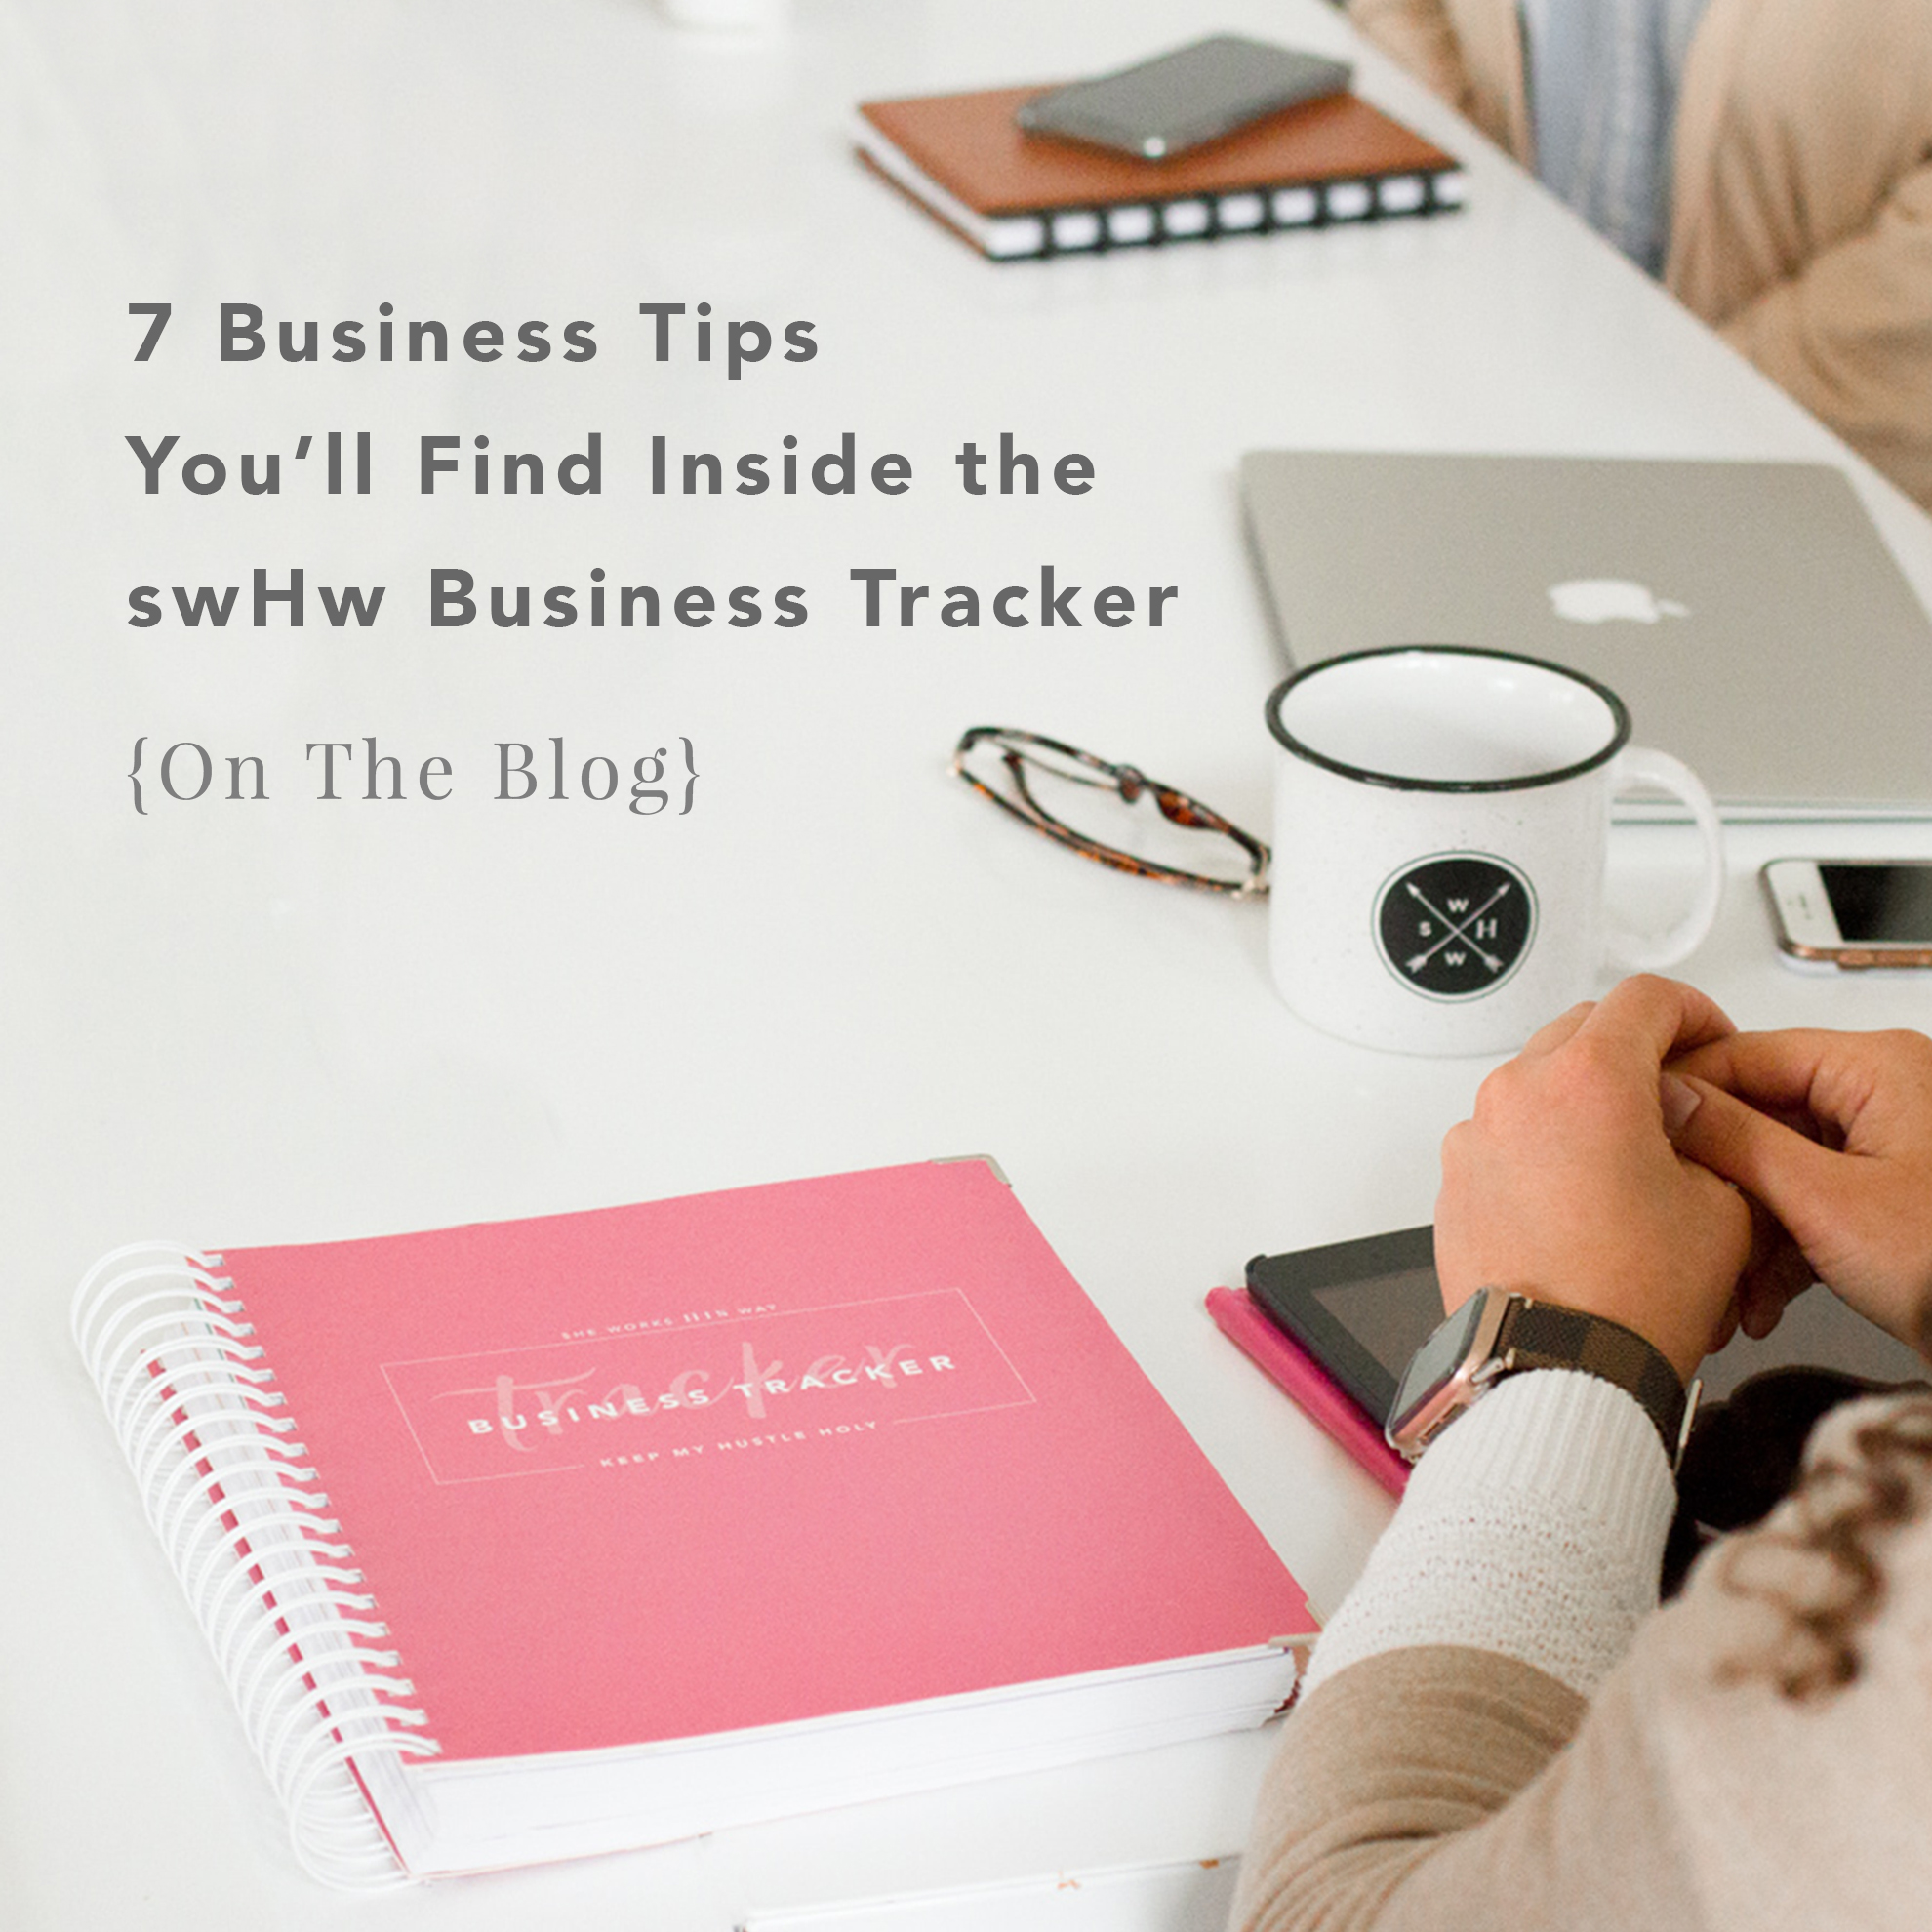 7 Business Tips You’ll Find Inside the swHw Business Tracker – She Works HIS Way